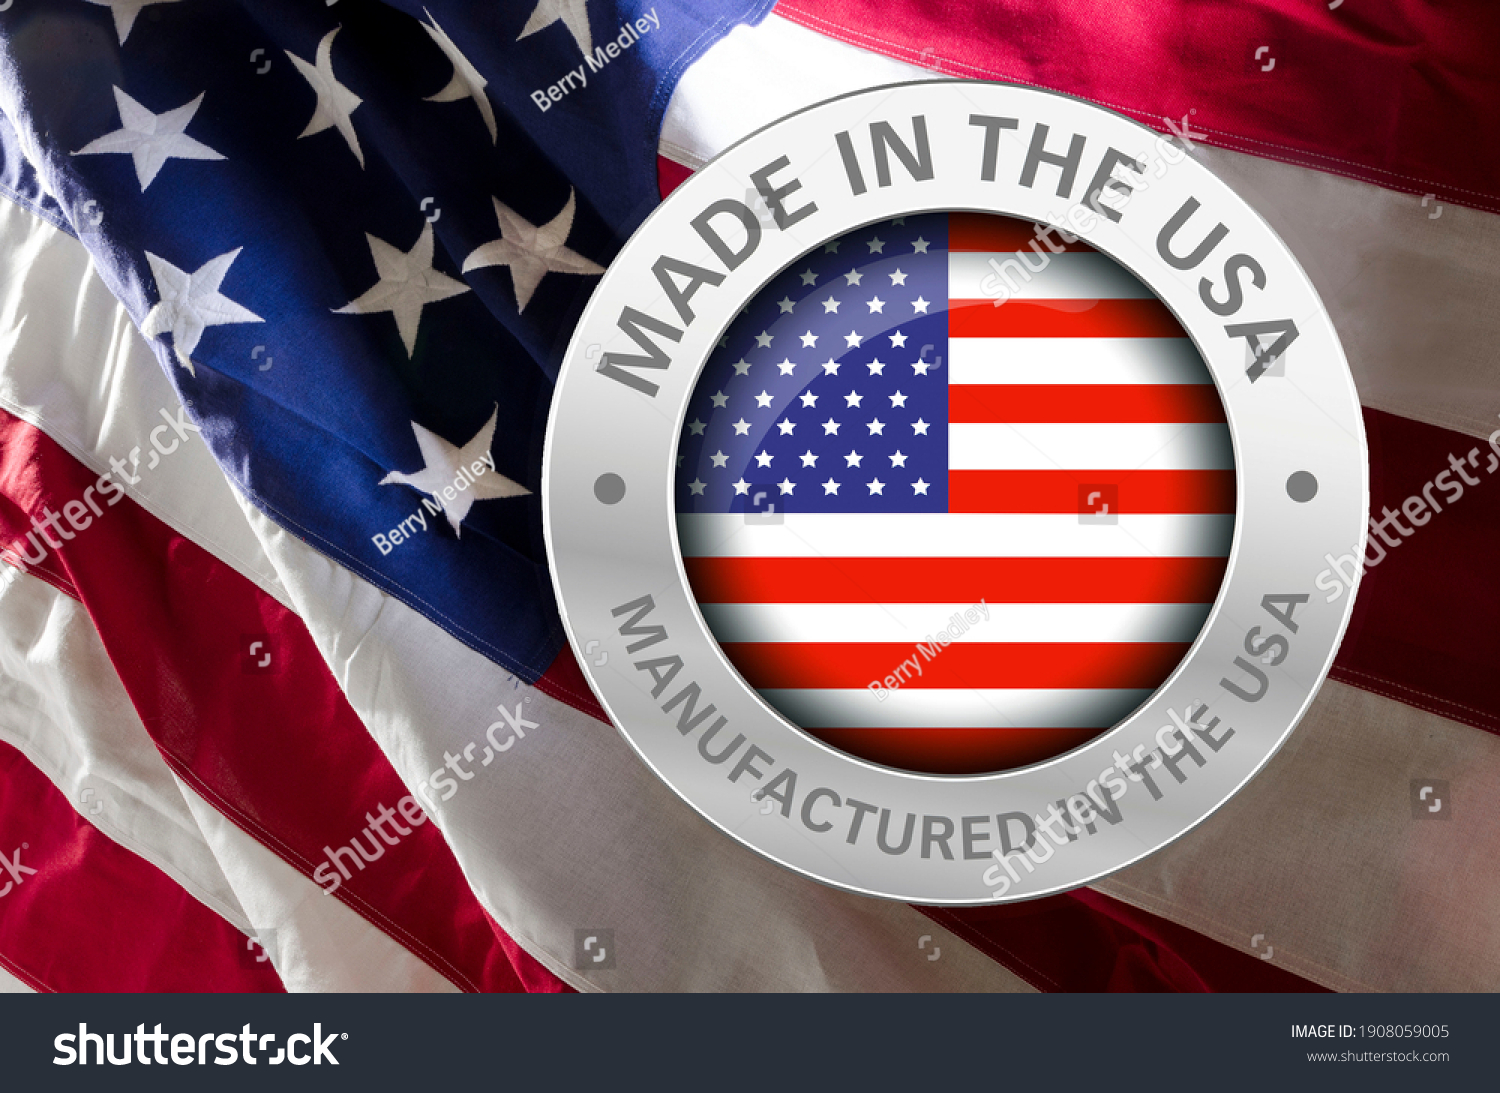 Made in America on American flag #1908059005